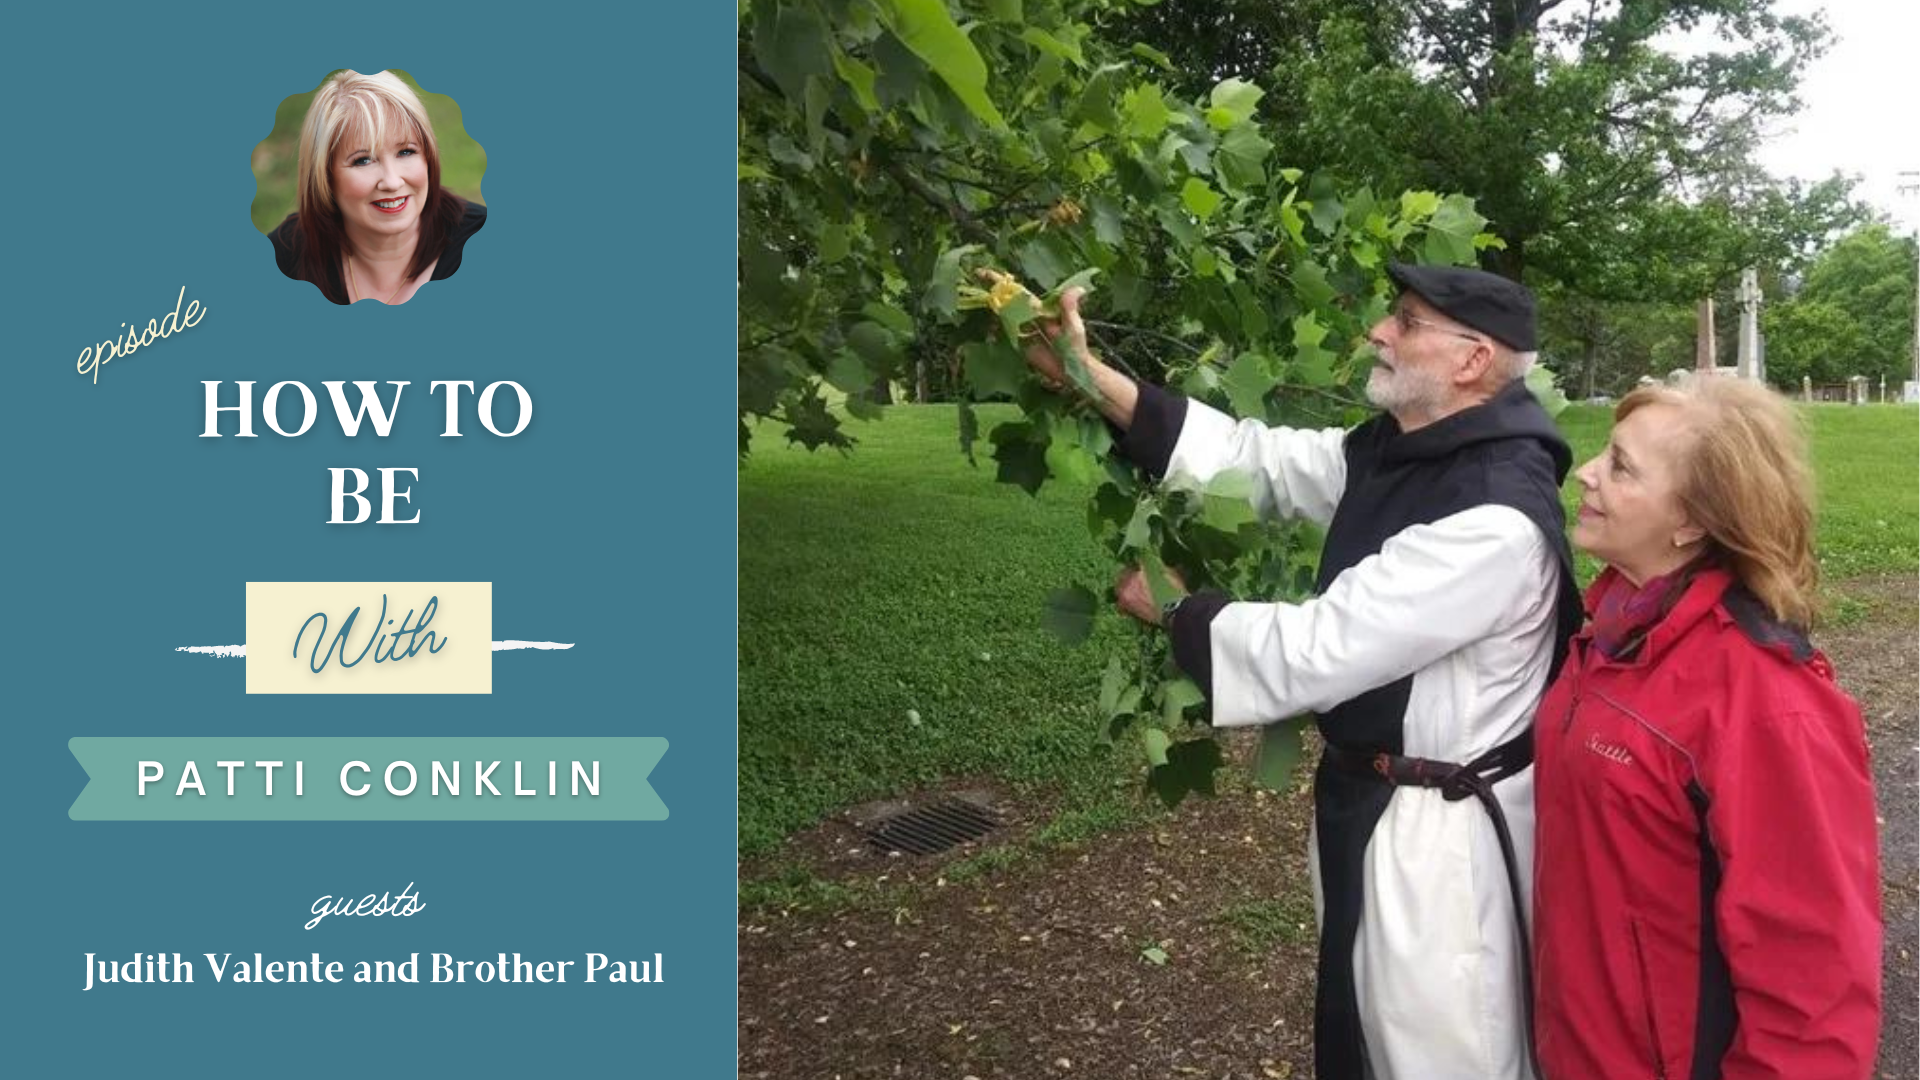 How to be with guest Judith Valente and Brother Paul Quenon with host Patti Conklin